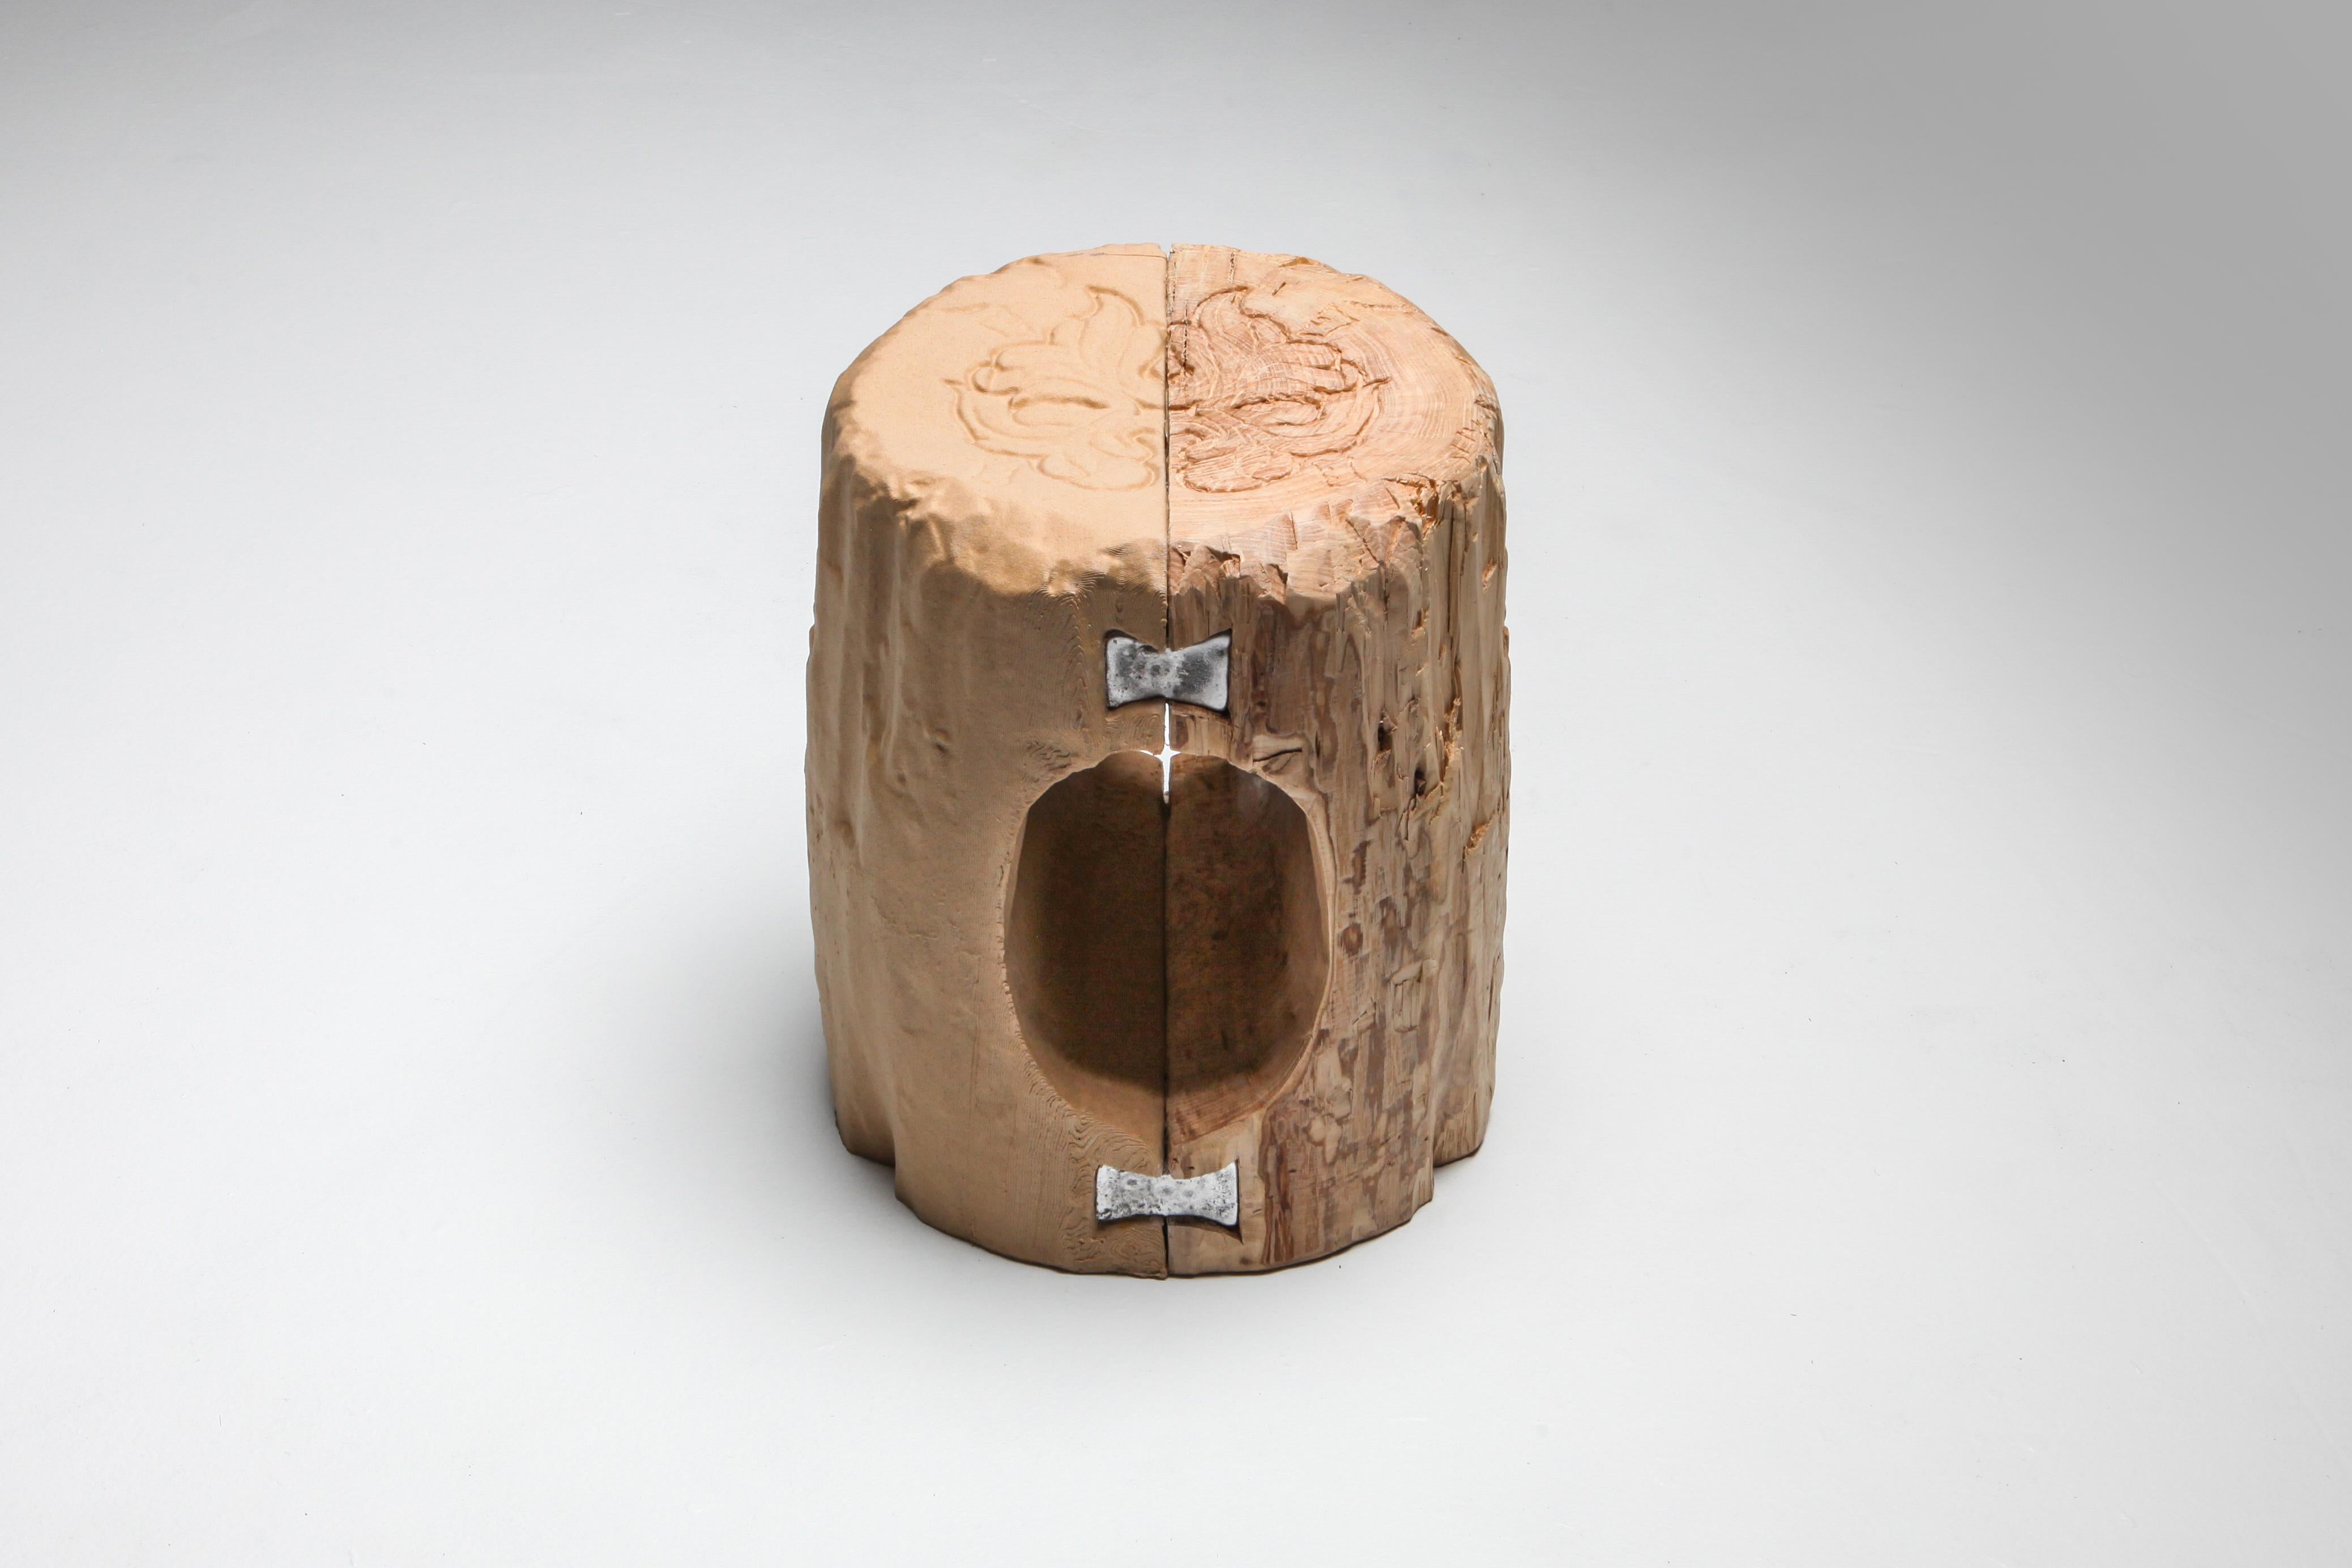 Echo stool (Dovetail)
Contemporary art, Functional art, 2020,
Wood, wood filament, resin, acrylic plaster, PU-foam and hardware
Measures: H 45.9, W 34.8, D 25 cm

This unique piece was exhibited in Schimmel & Schweikle's solo show 'A tree full